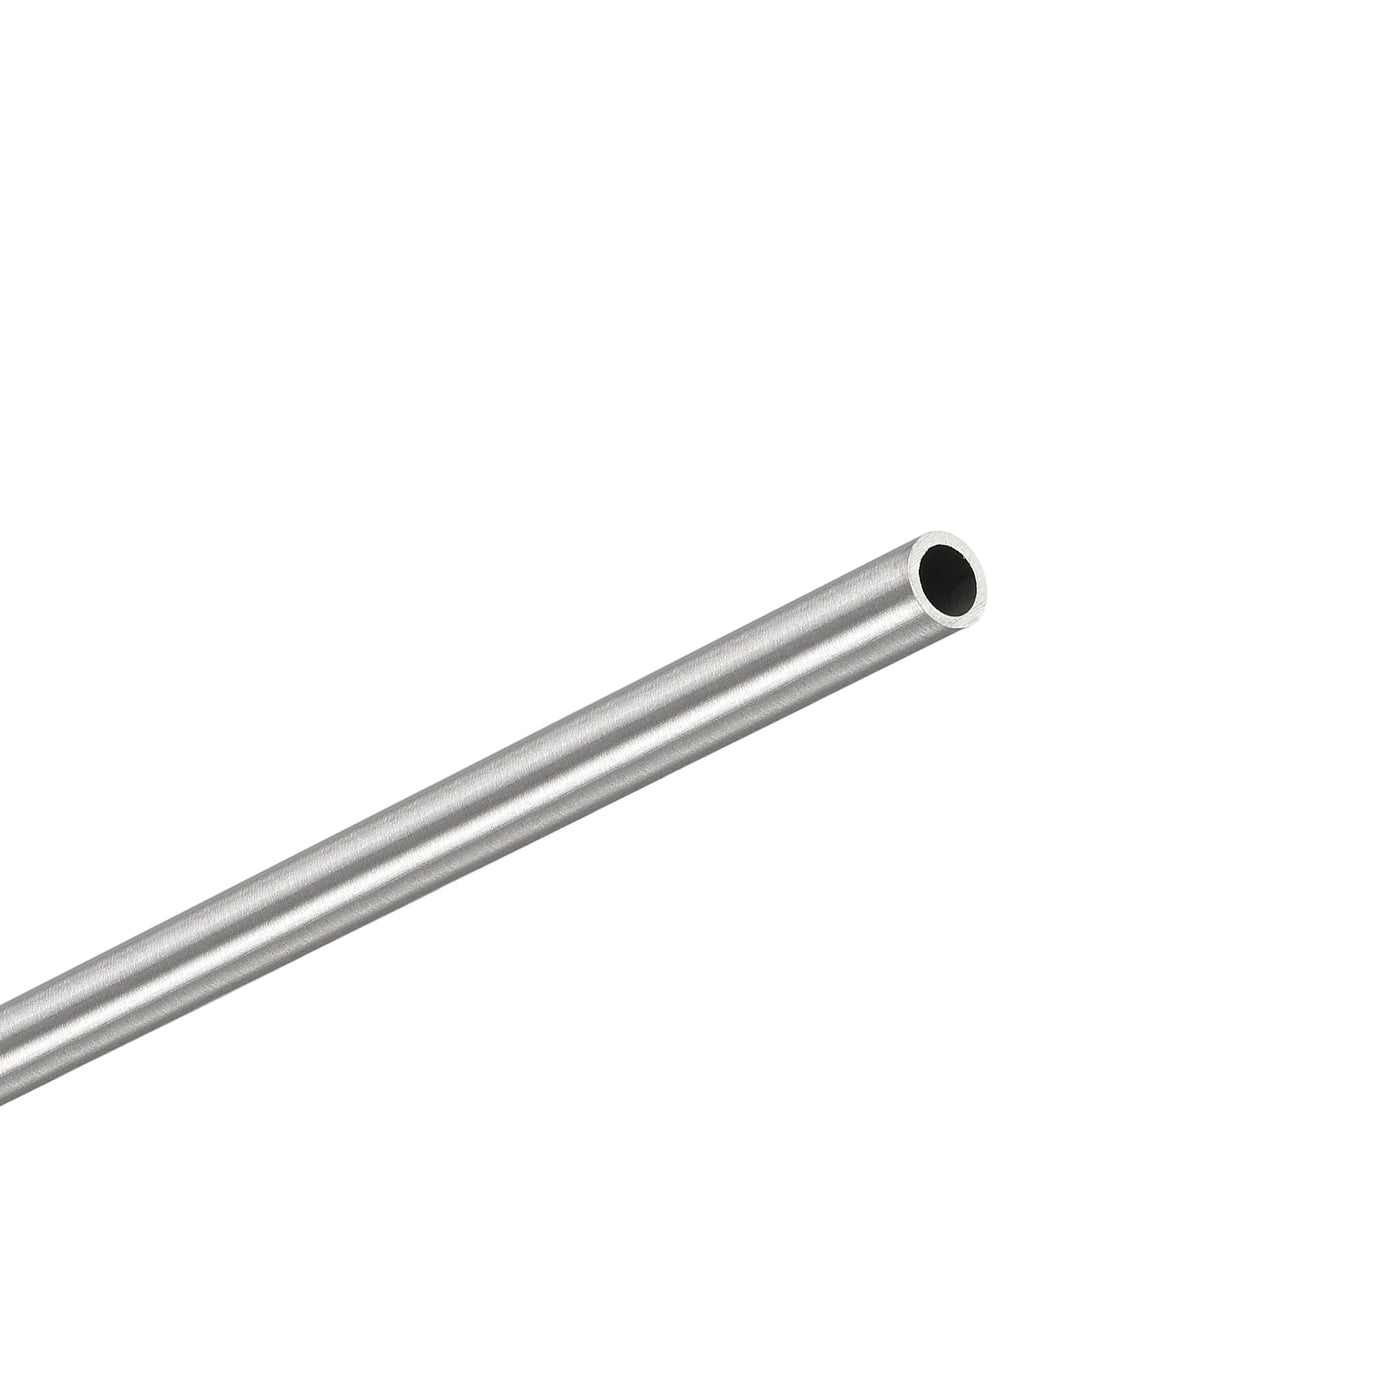 uxcell Uxcell 304 Stainless Steel Tube 1mm 2mm OD x 0.15mm Wall Thick, 3mm 4mm 5mm 6mm 7mm 8mm OD x 0.6mm Wall Thick 300mm Length Pack of 8